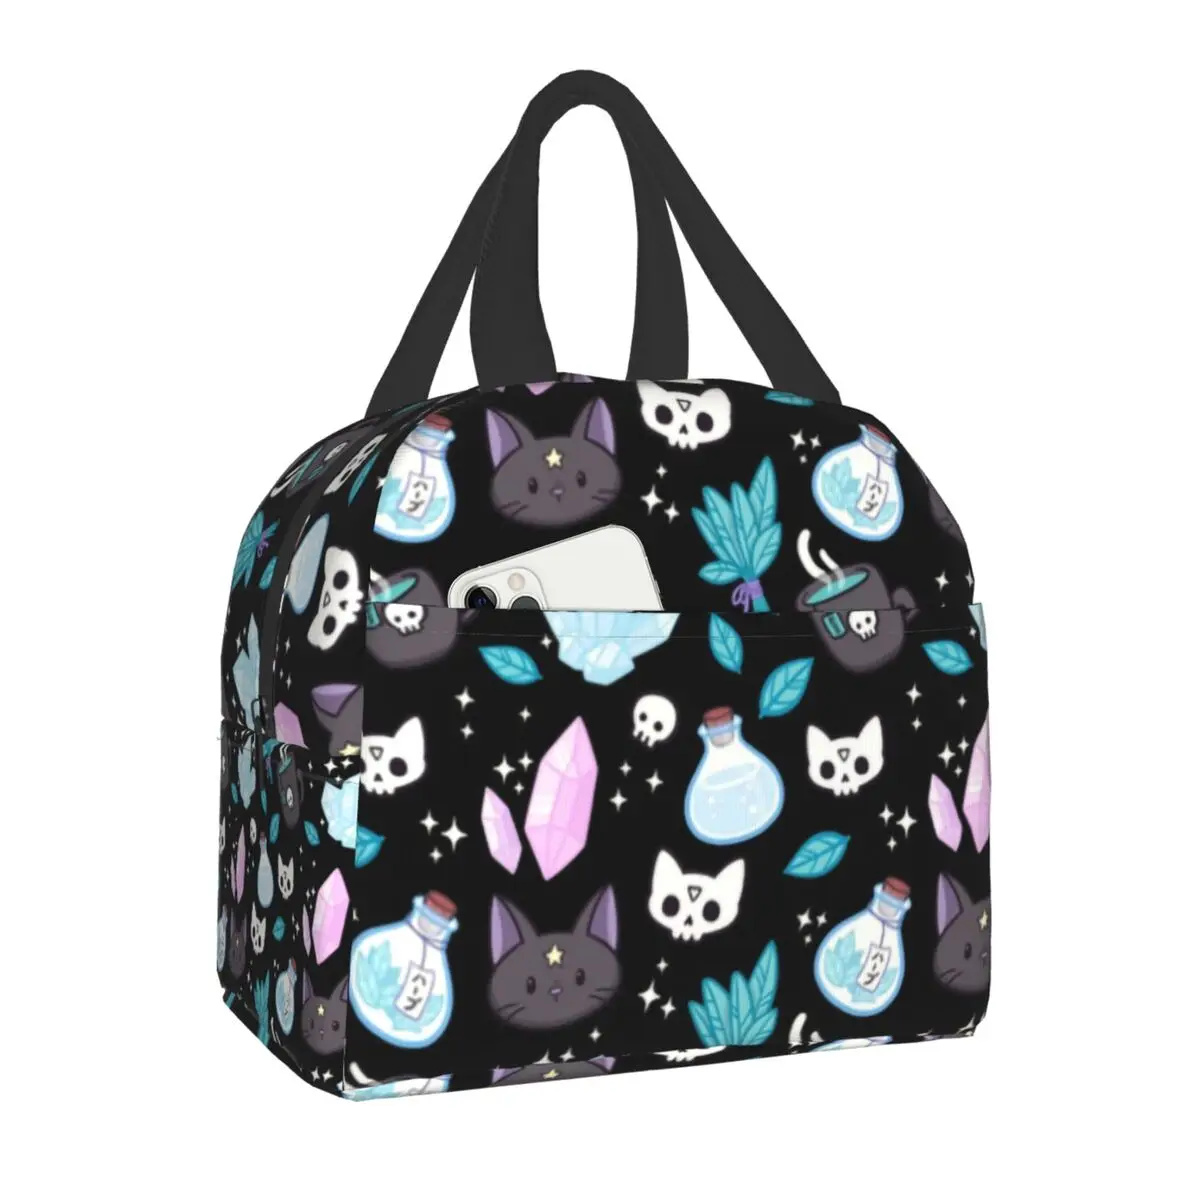 

Herb Witch Pattern Insulated Lunch Bag for Women Resuable Spooky Cat Skull Thermal Cooler Lunch Tote Office Work School